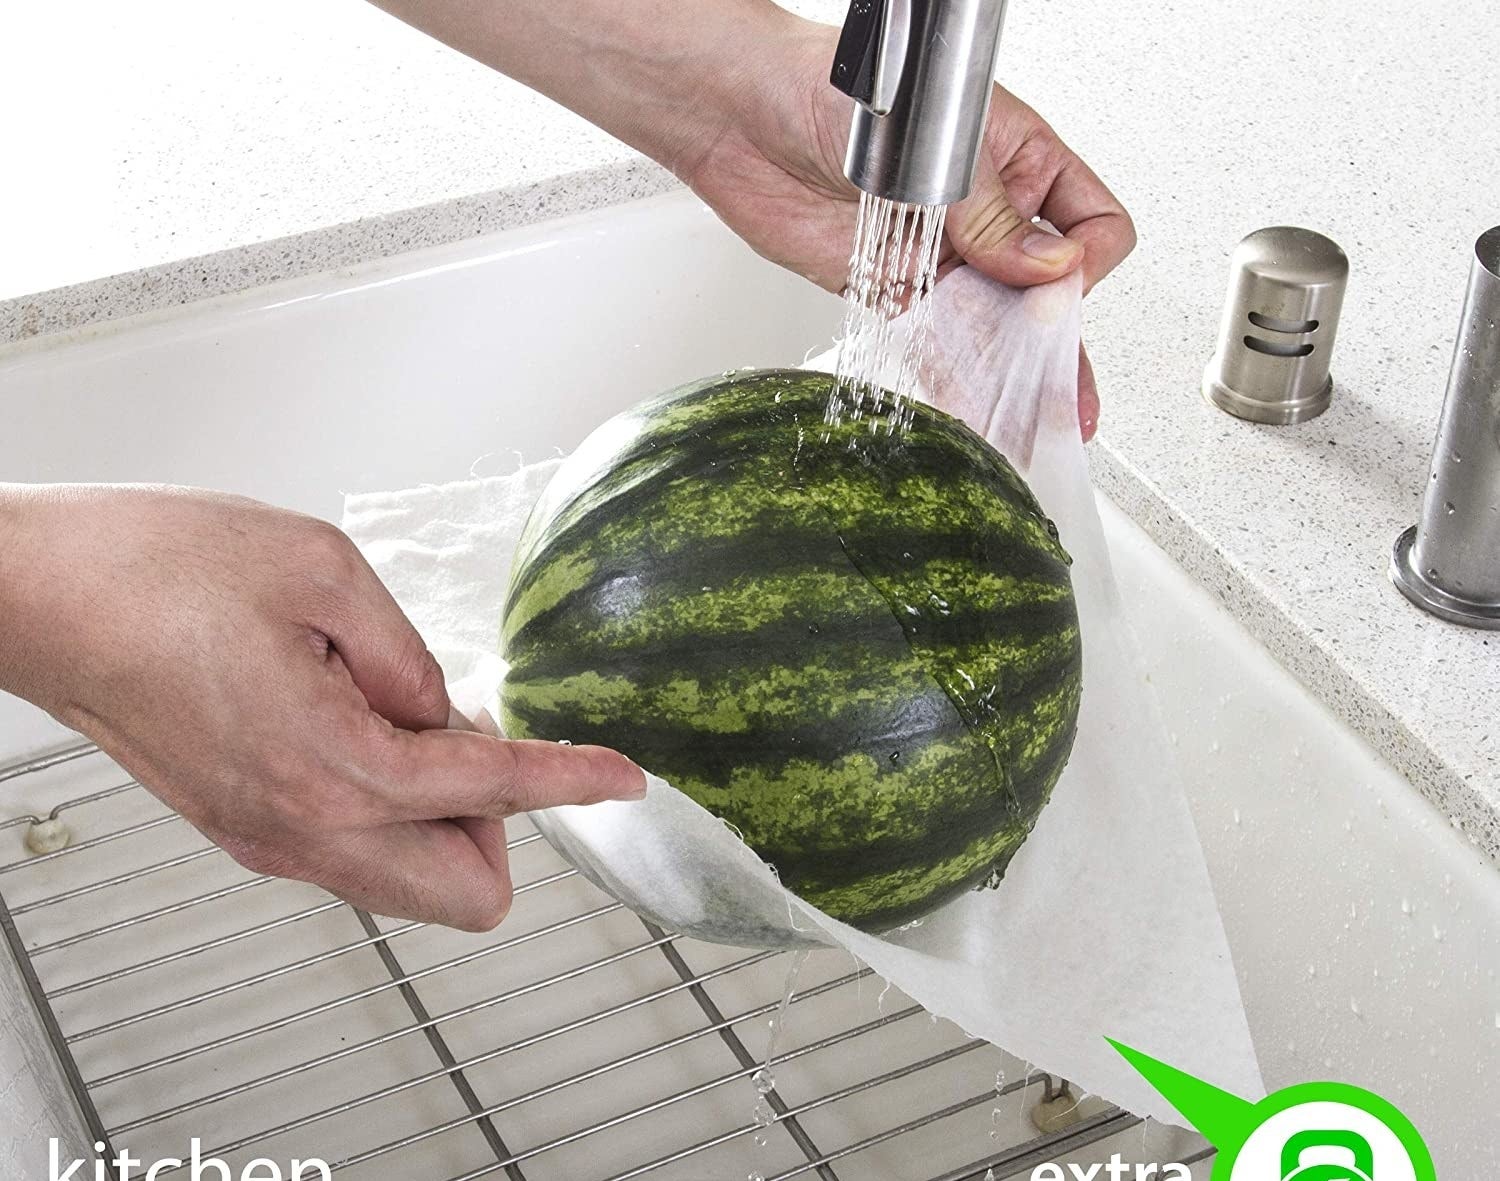 Model&#x27;s hand&#x27;s holding a small watermelon in bamboo towel under running water